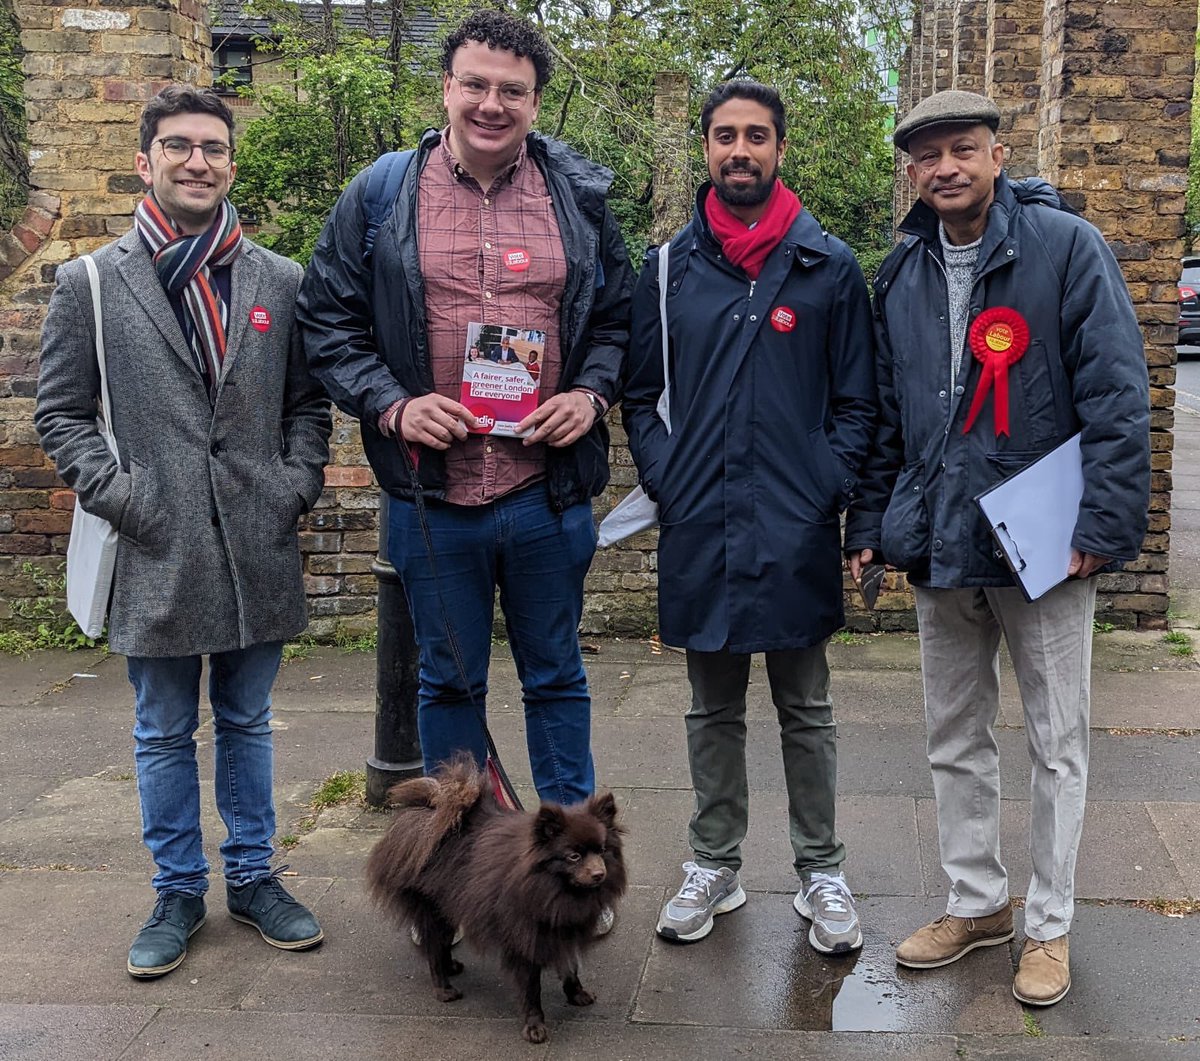 Great morning with @IslingtonLabour on the #LabourDoorstep ahead of the Hillrise by-election this Thursday and elections for @Semakaleng and @SadiqKhan. Particularly pleased to have been joined by my favourite local resident Heidi 🐾